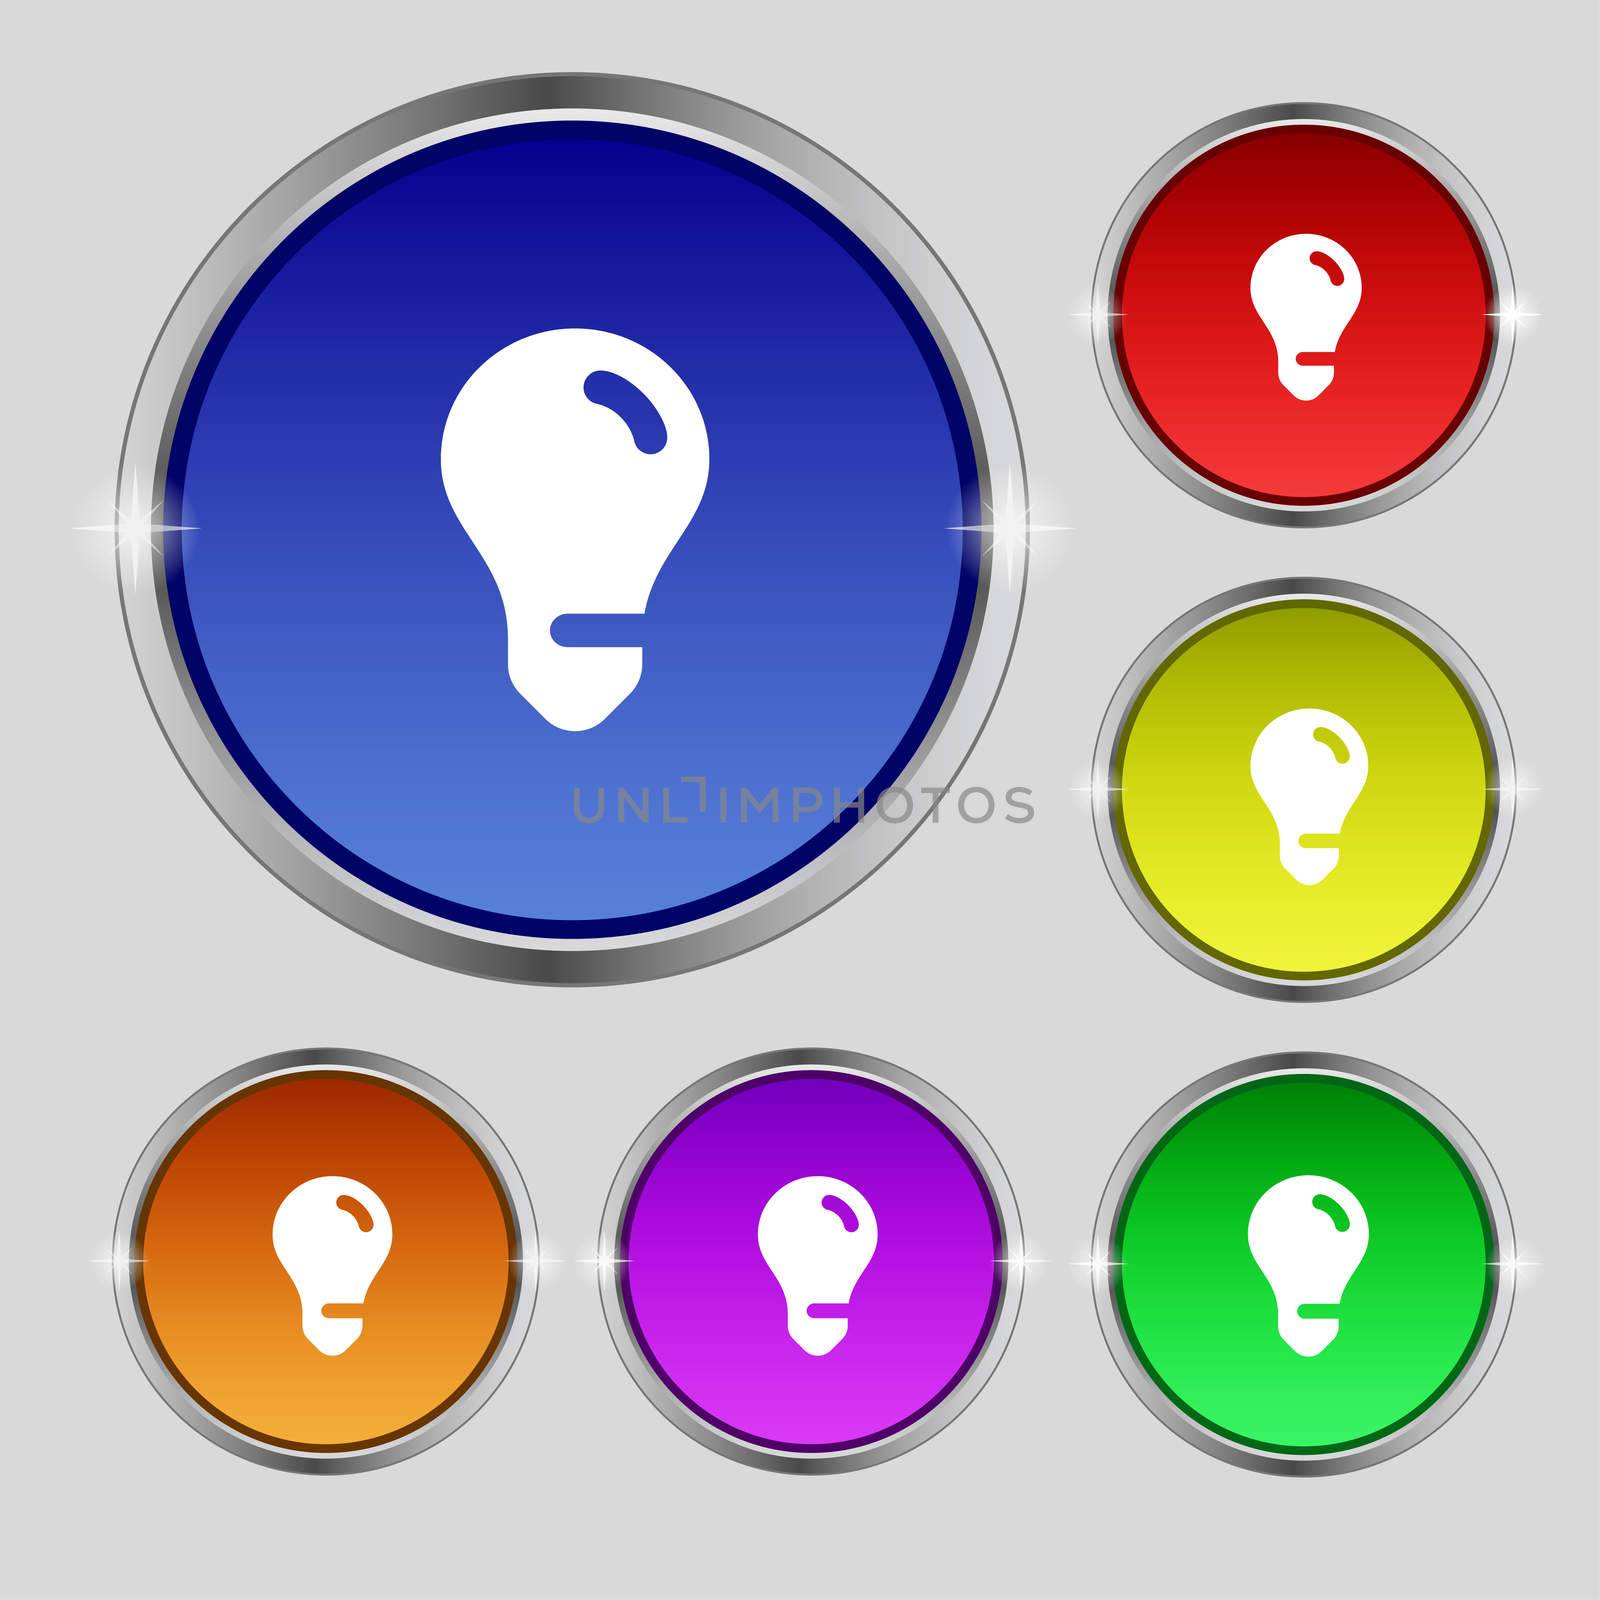 light bulb, idea icon sign. Round symbol on bright colourful buttons. illustration